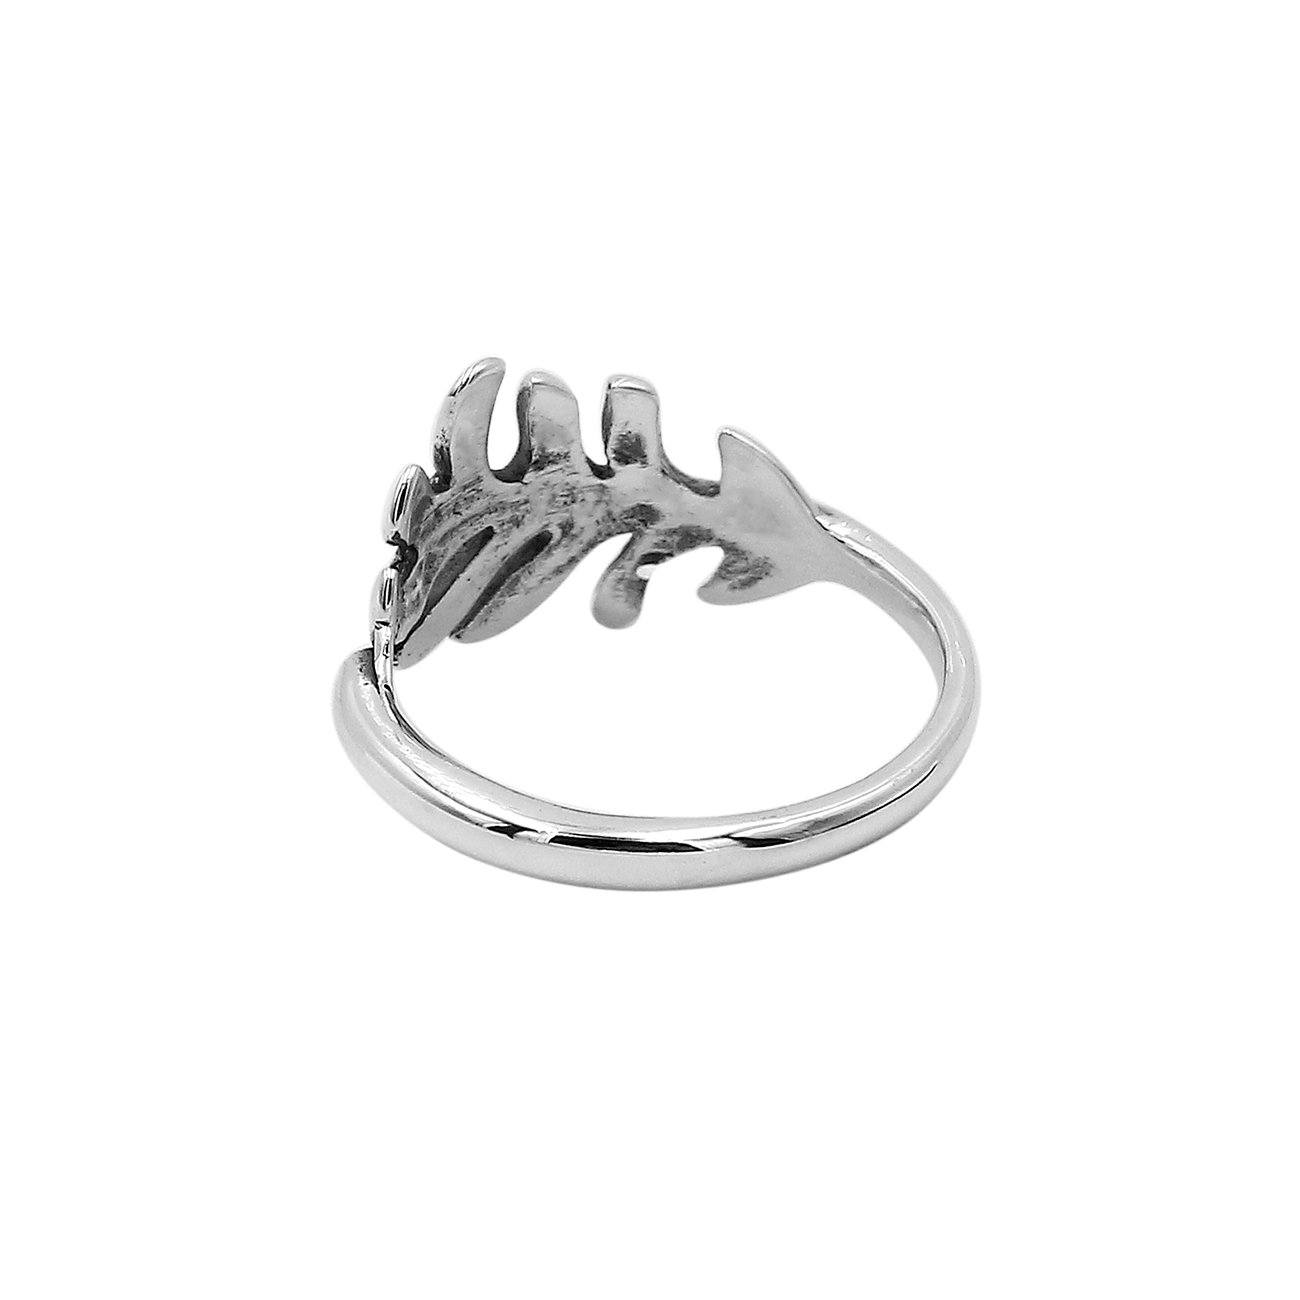 Designer Multistone Stacking Ring Gift for women Sterling Silver Jewelry —  Discovered